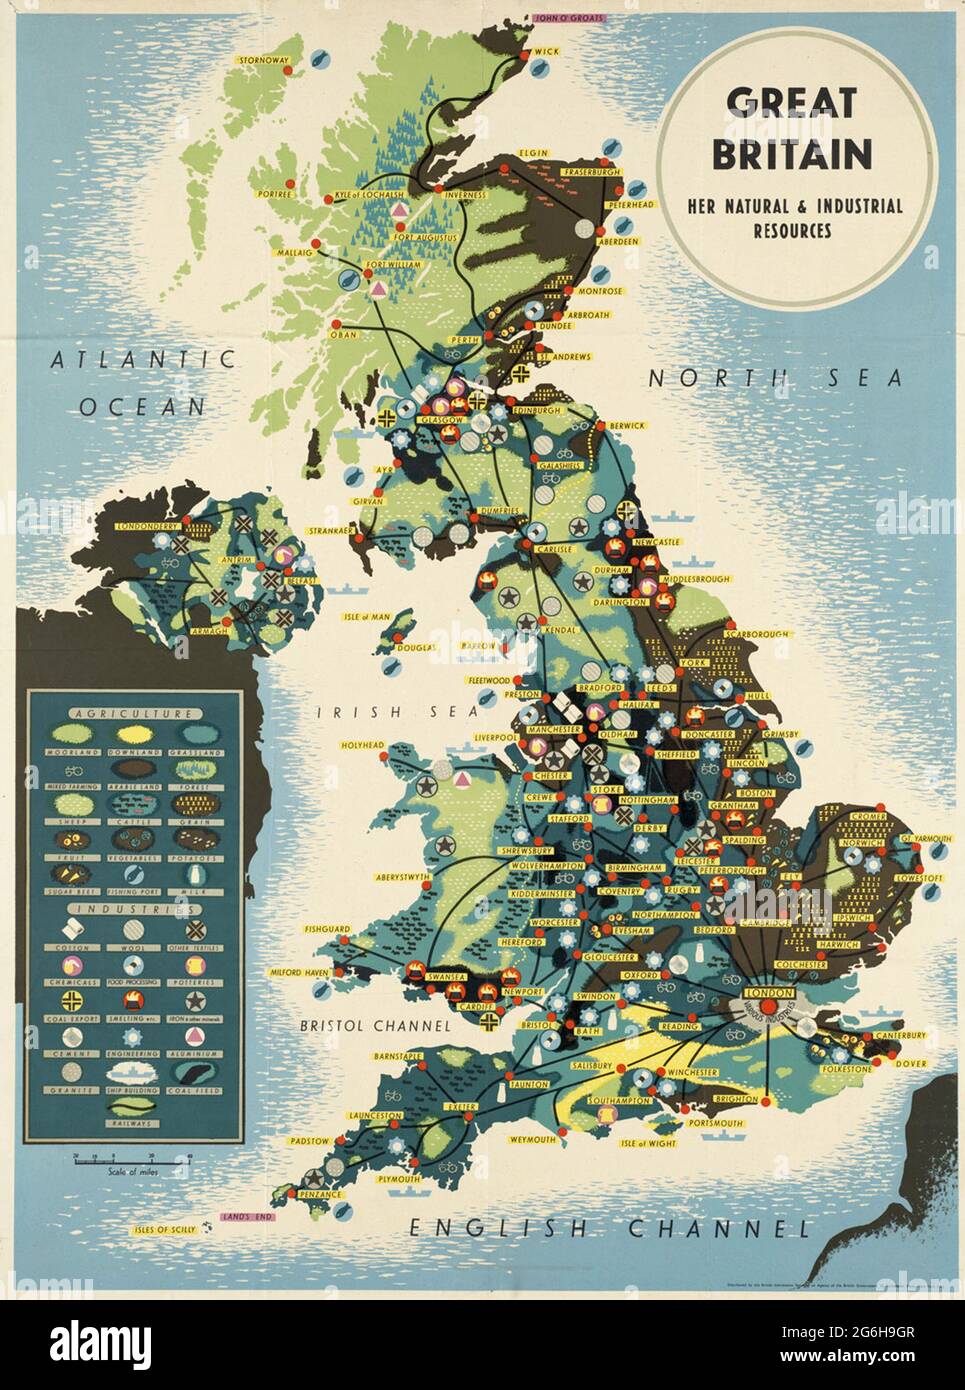 A vintage poster showing the natural and industrial resources of Great Britain Stock Photo